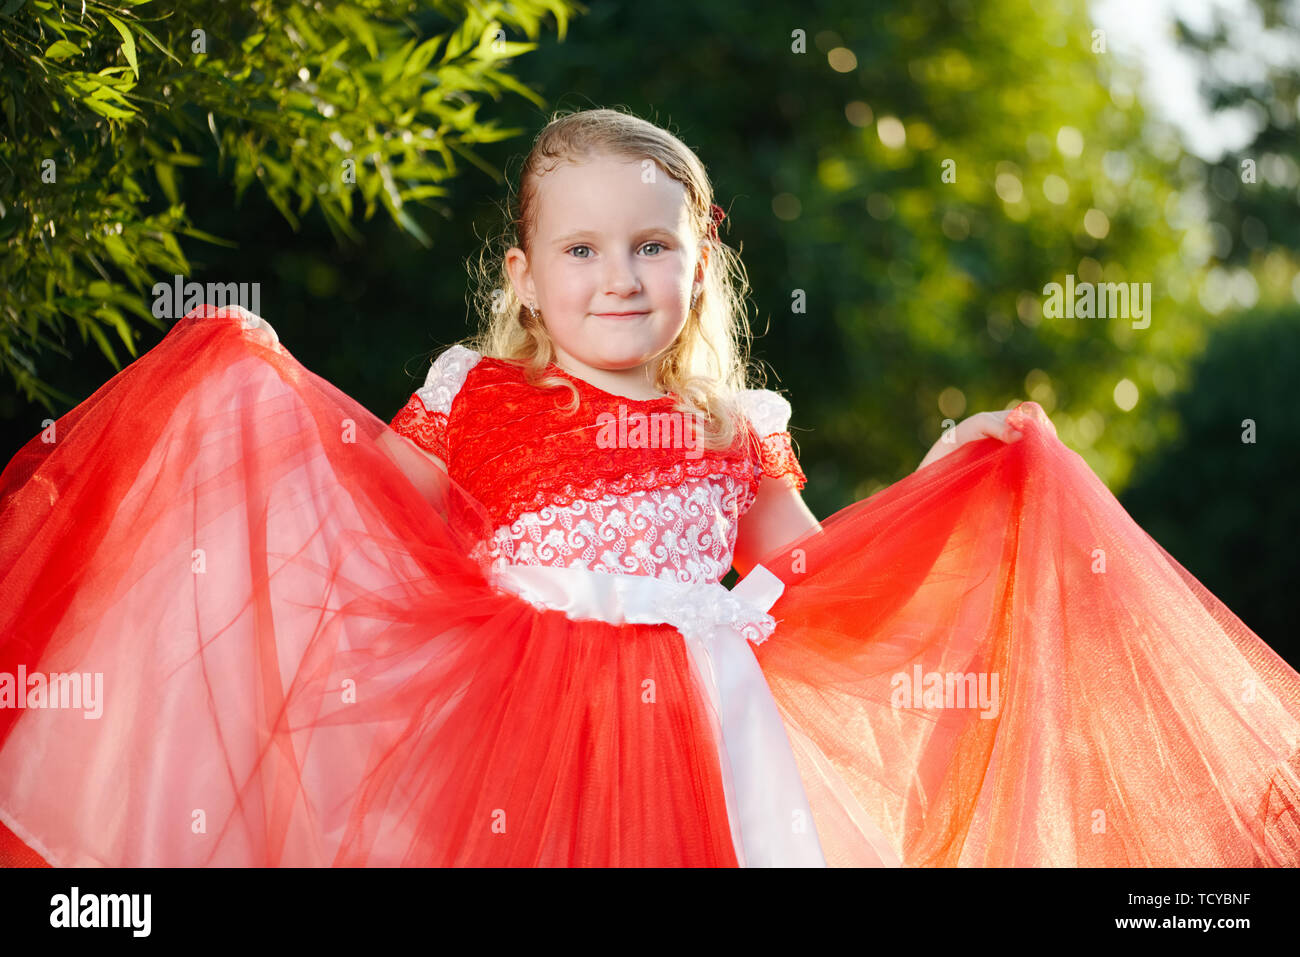 girl with beautiful red dress in park Stock Photo